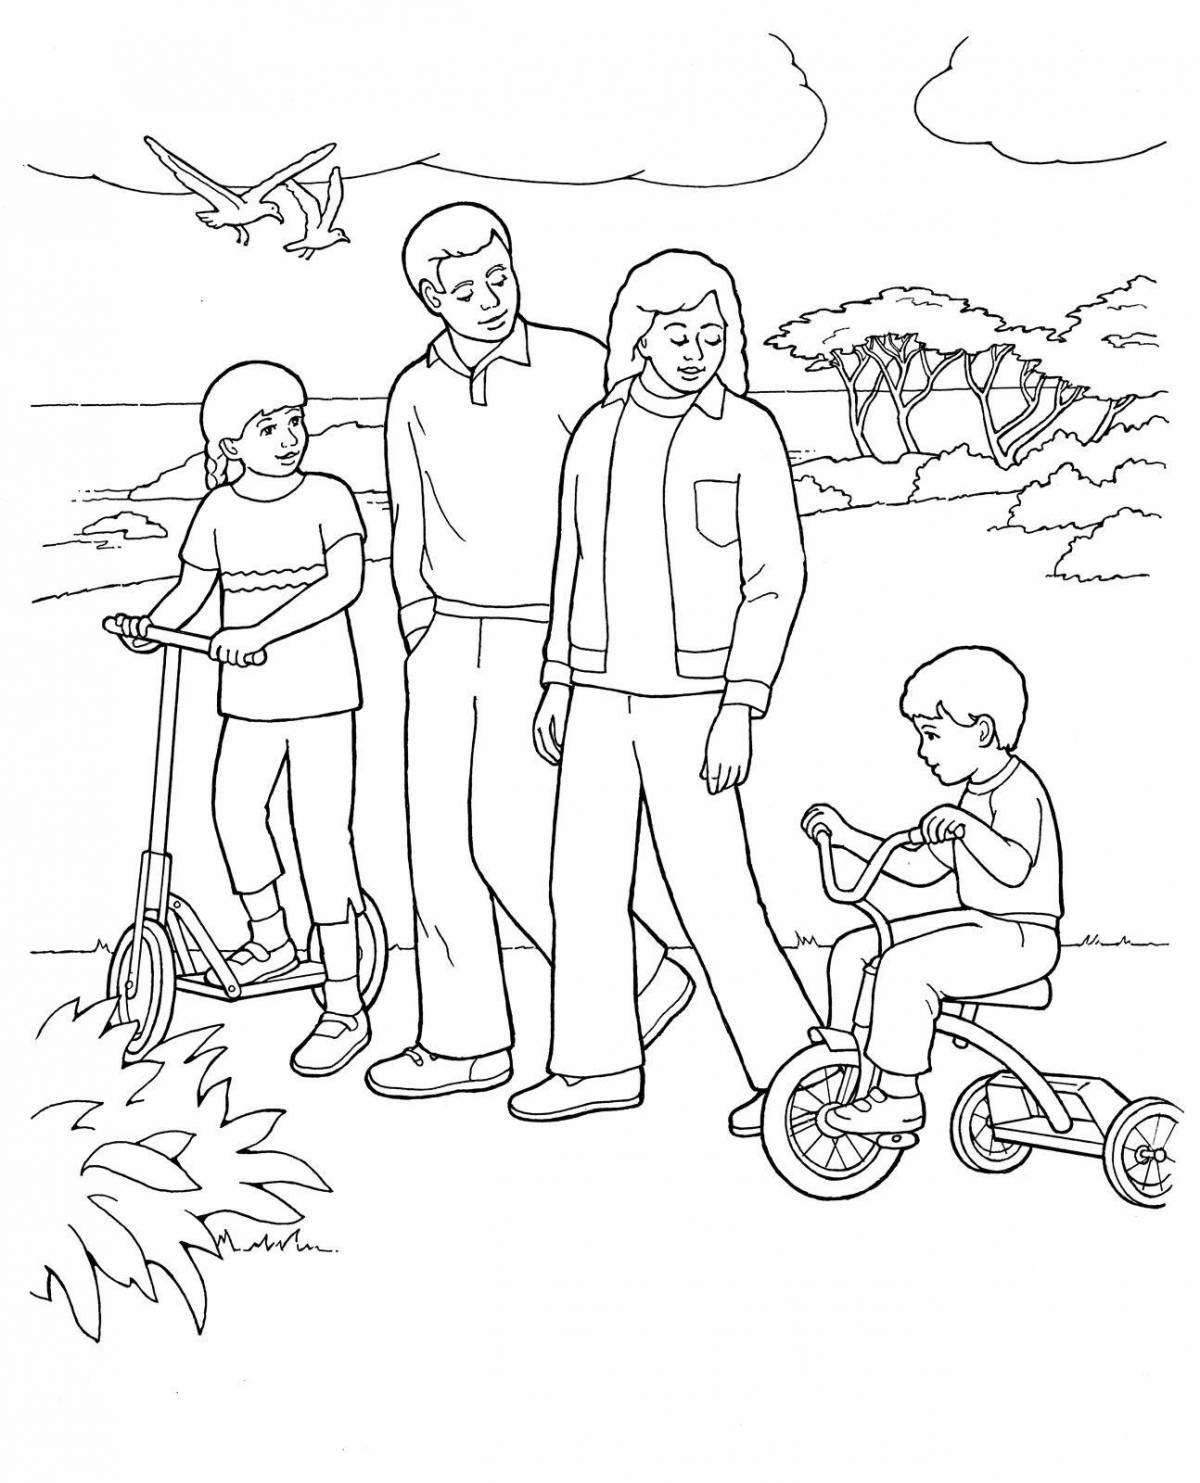 Optimistic family coloring book